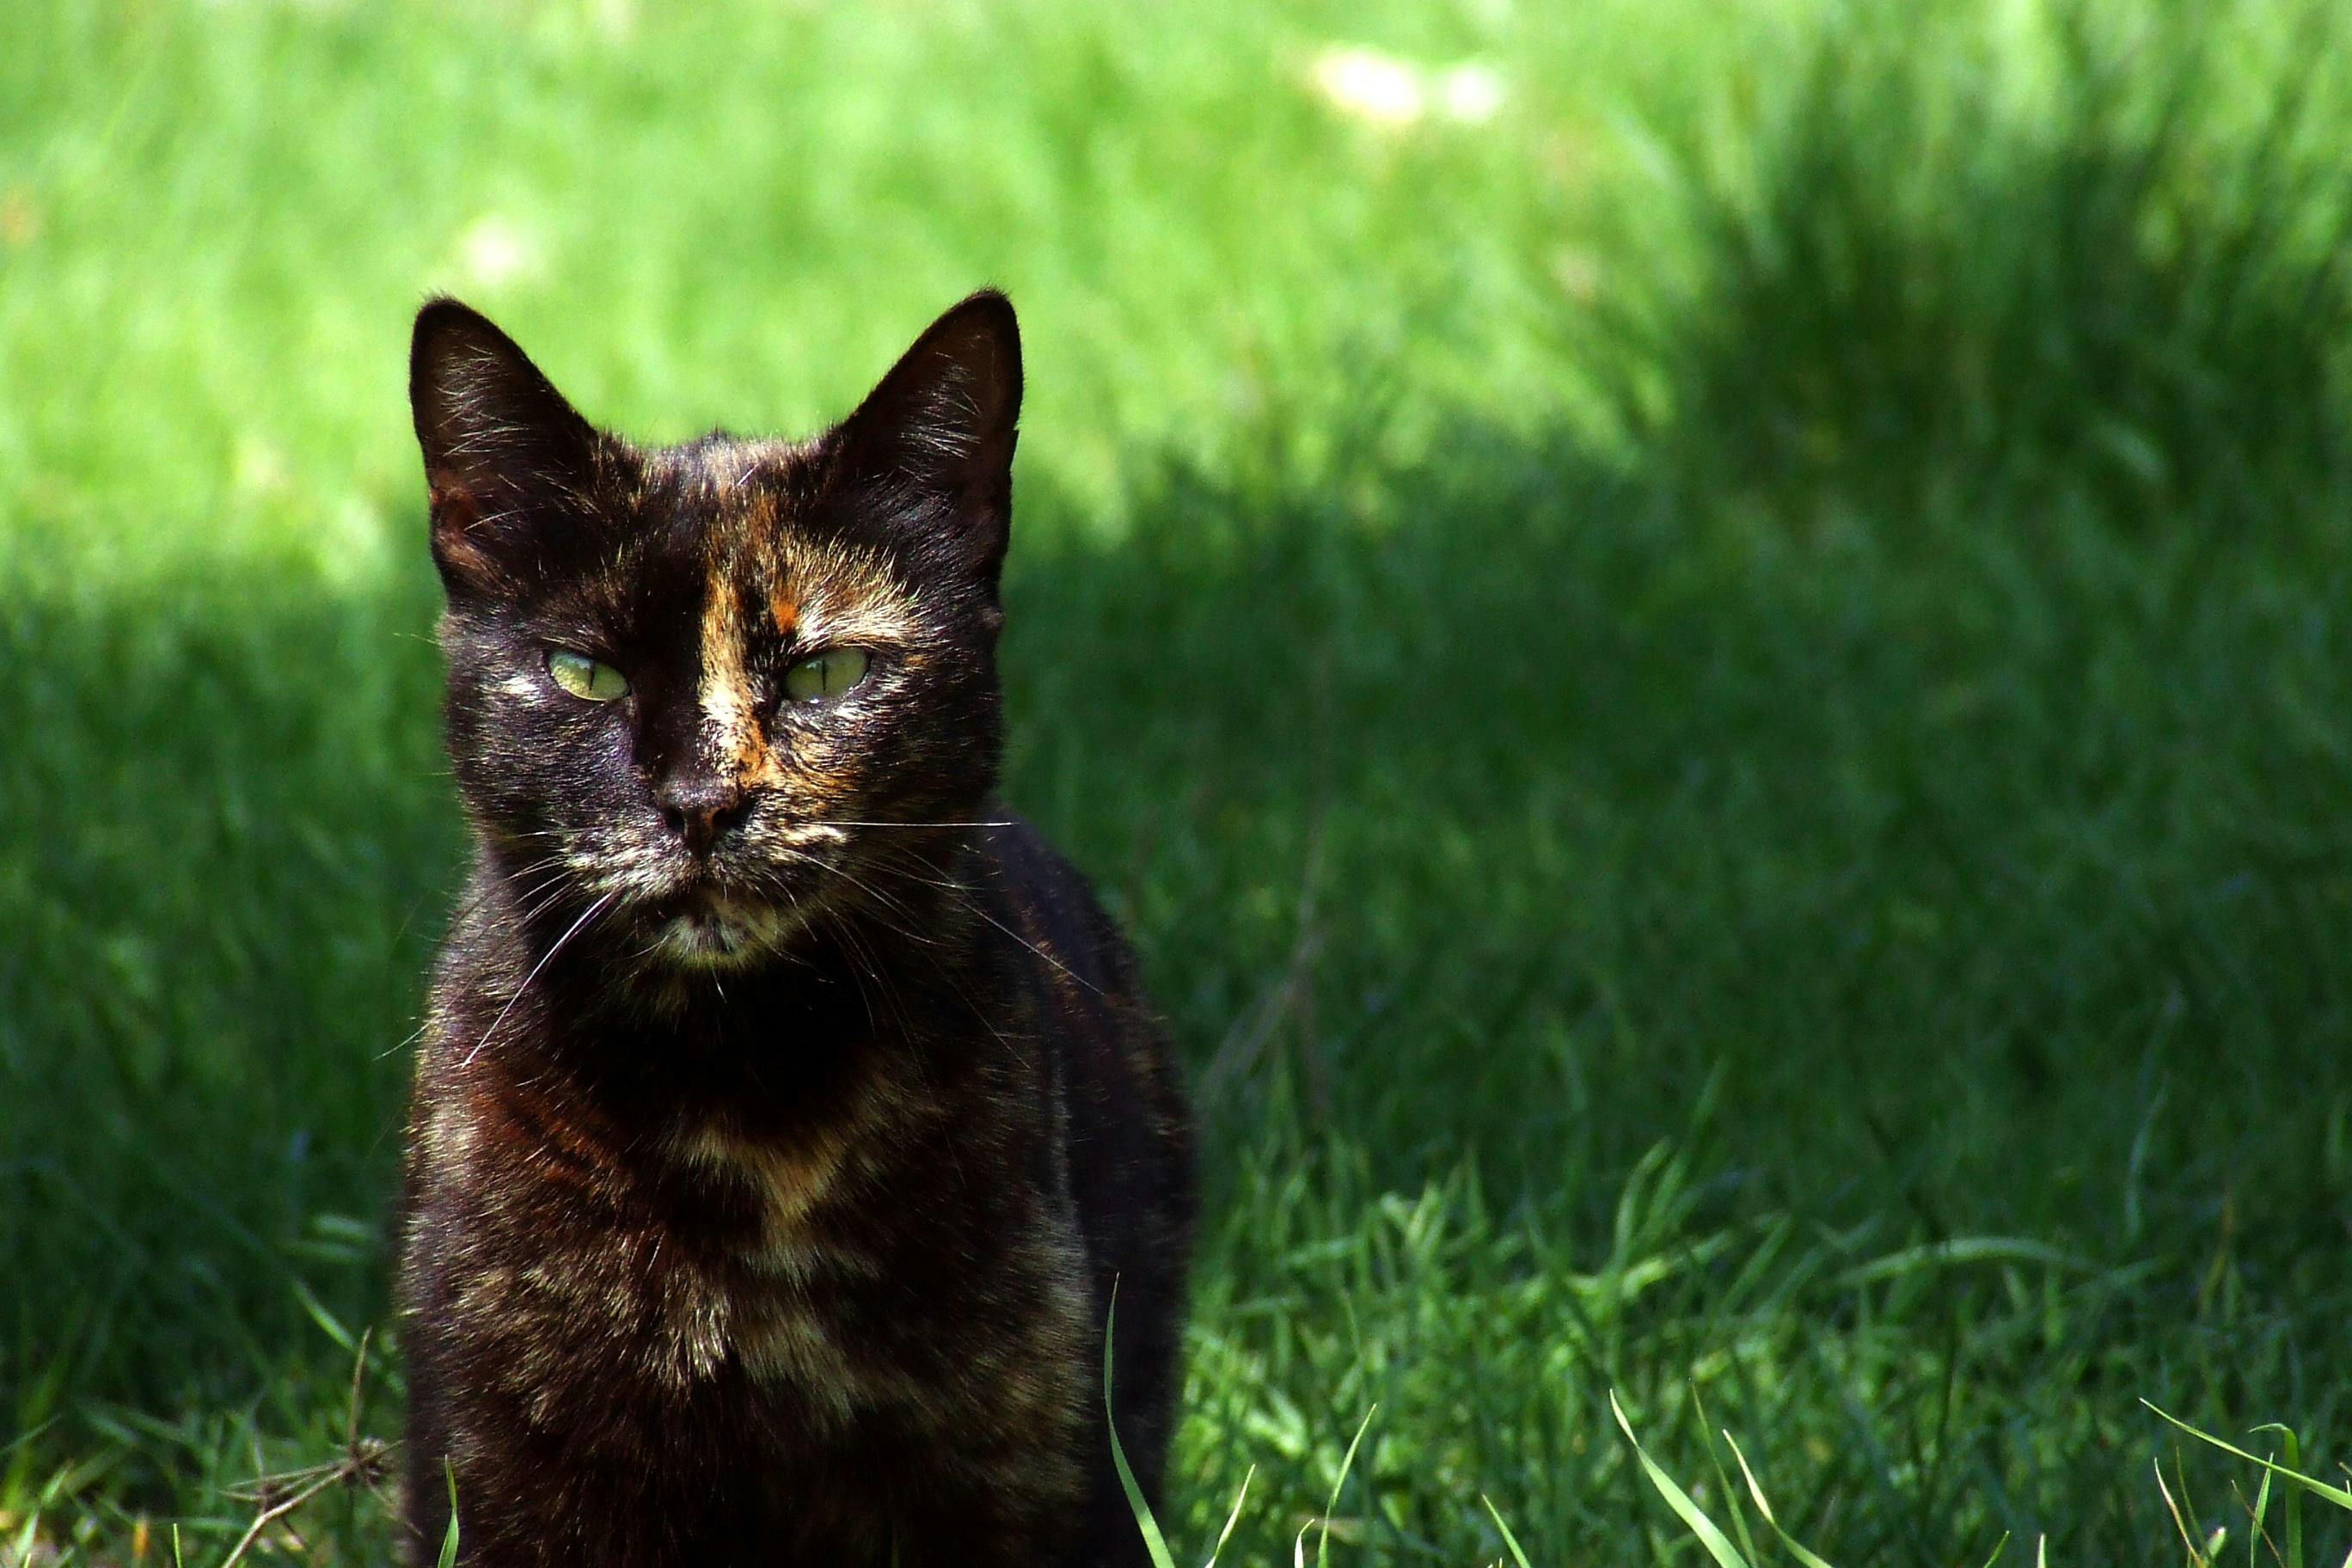 Tortoise shell cat looking at camera